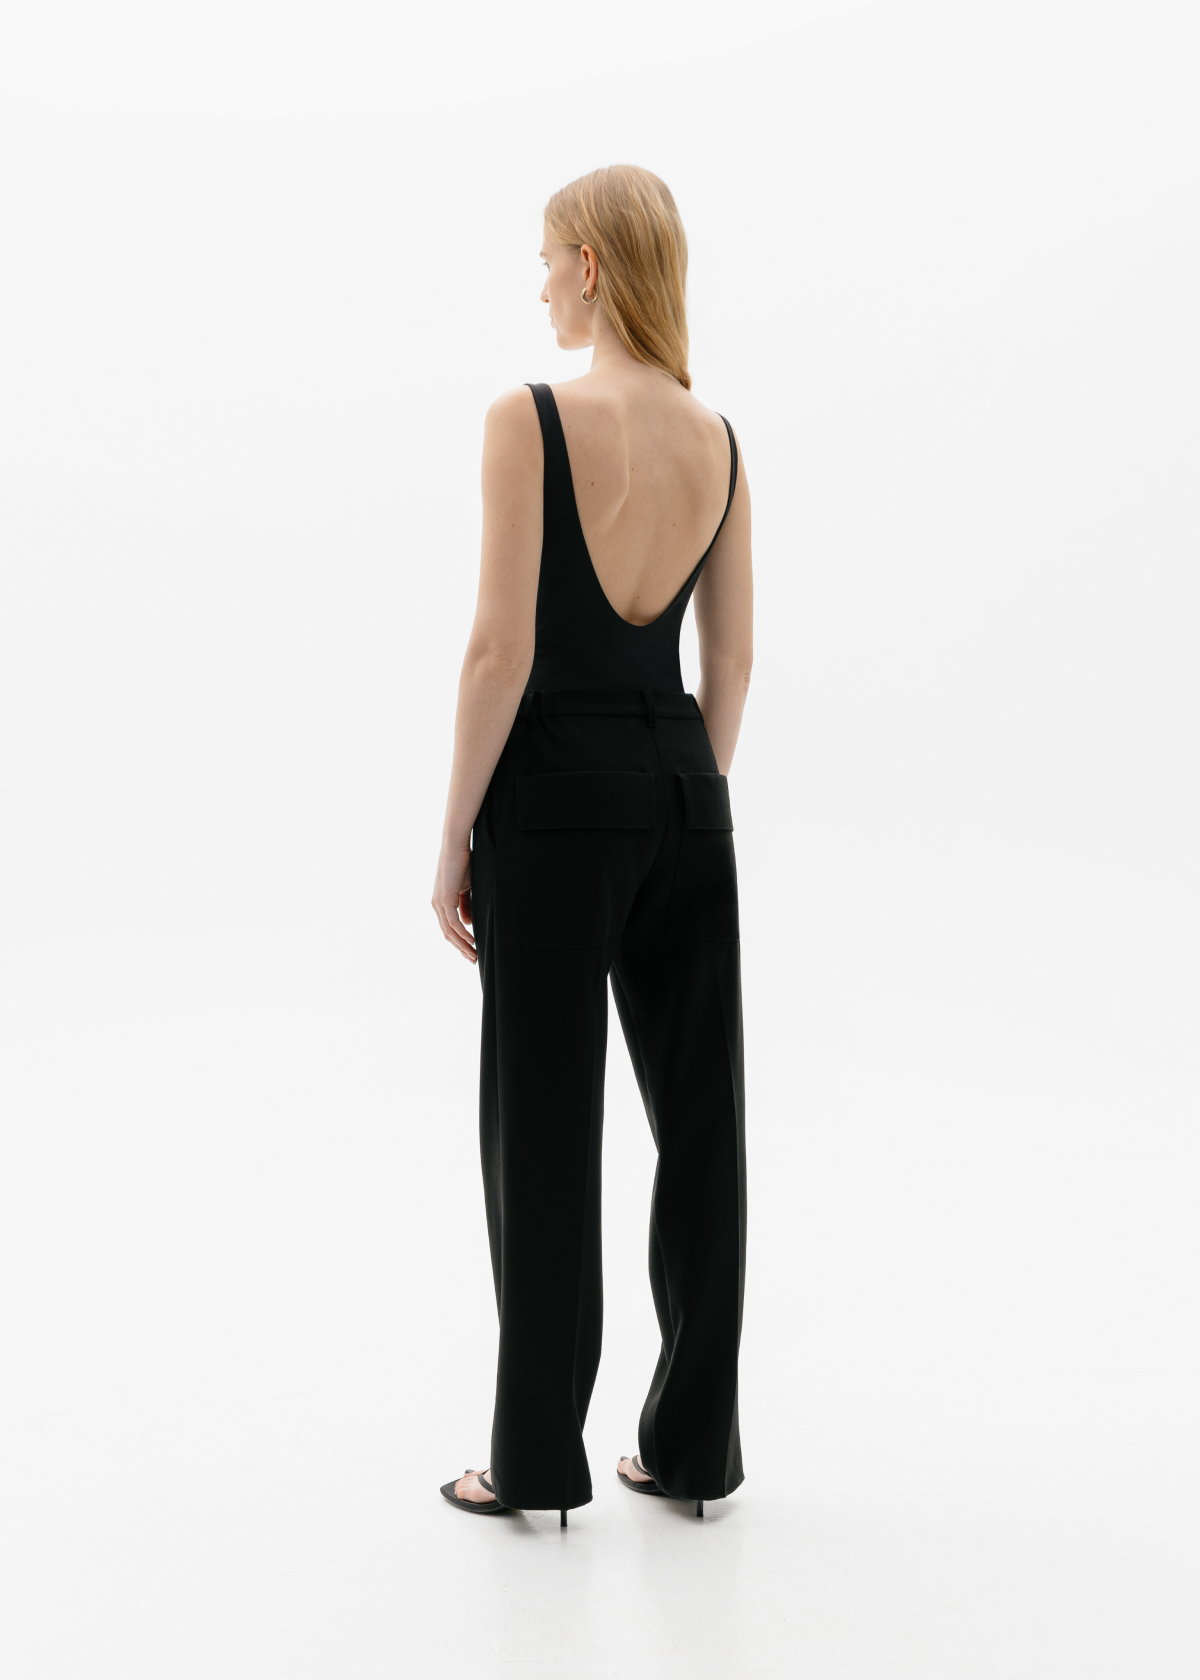 Trousers with pockets in black